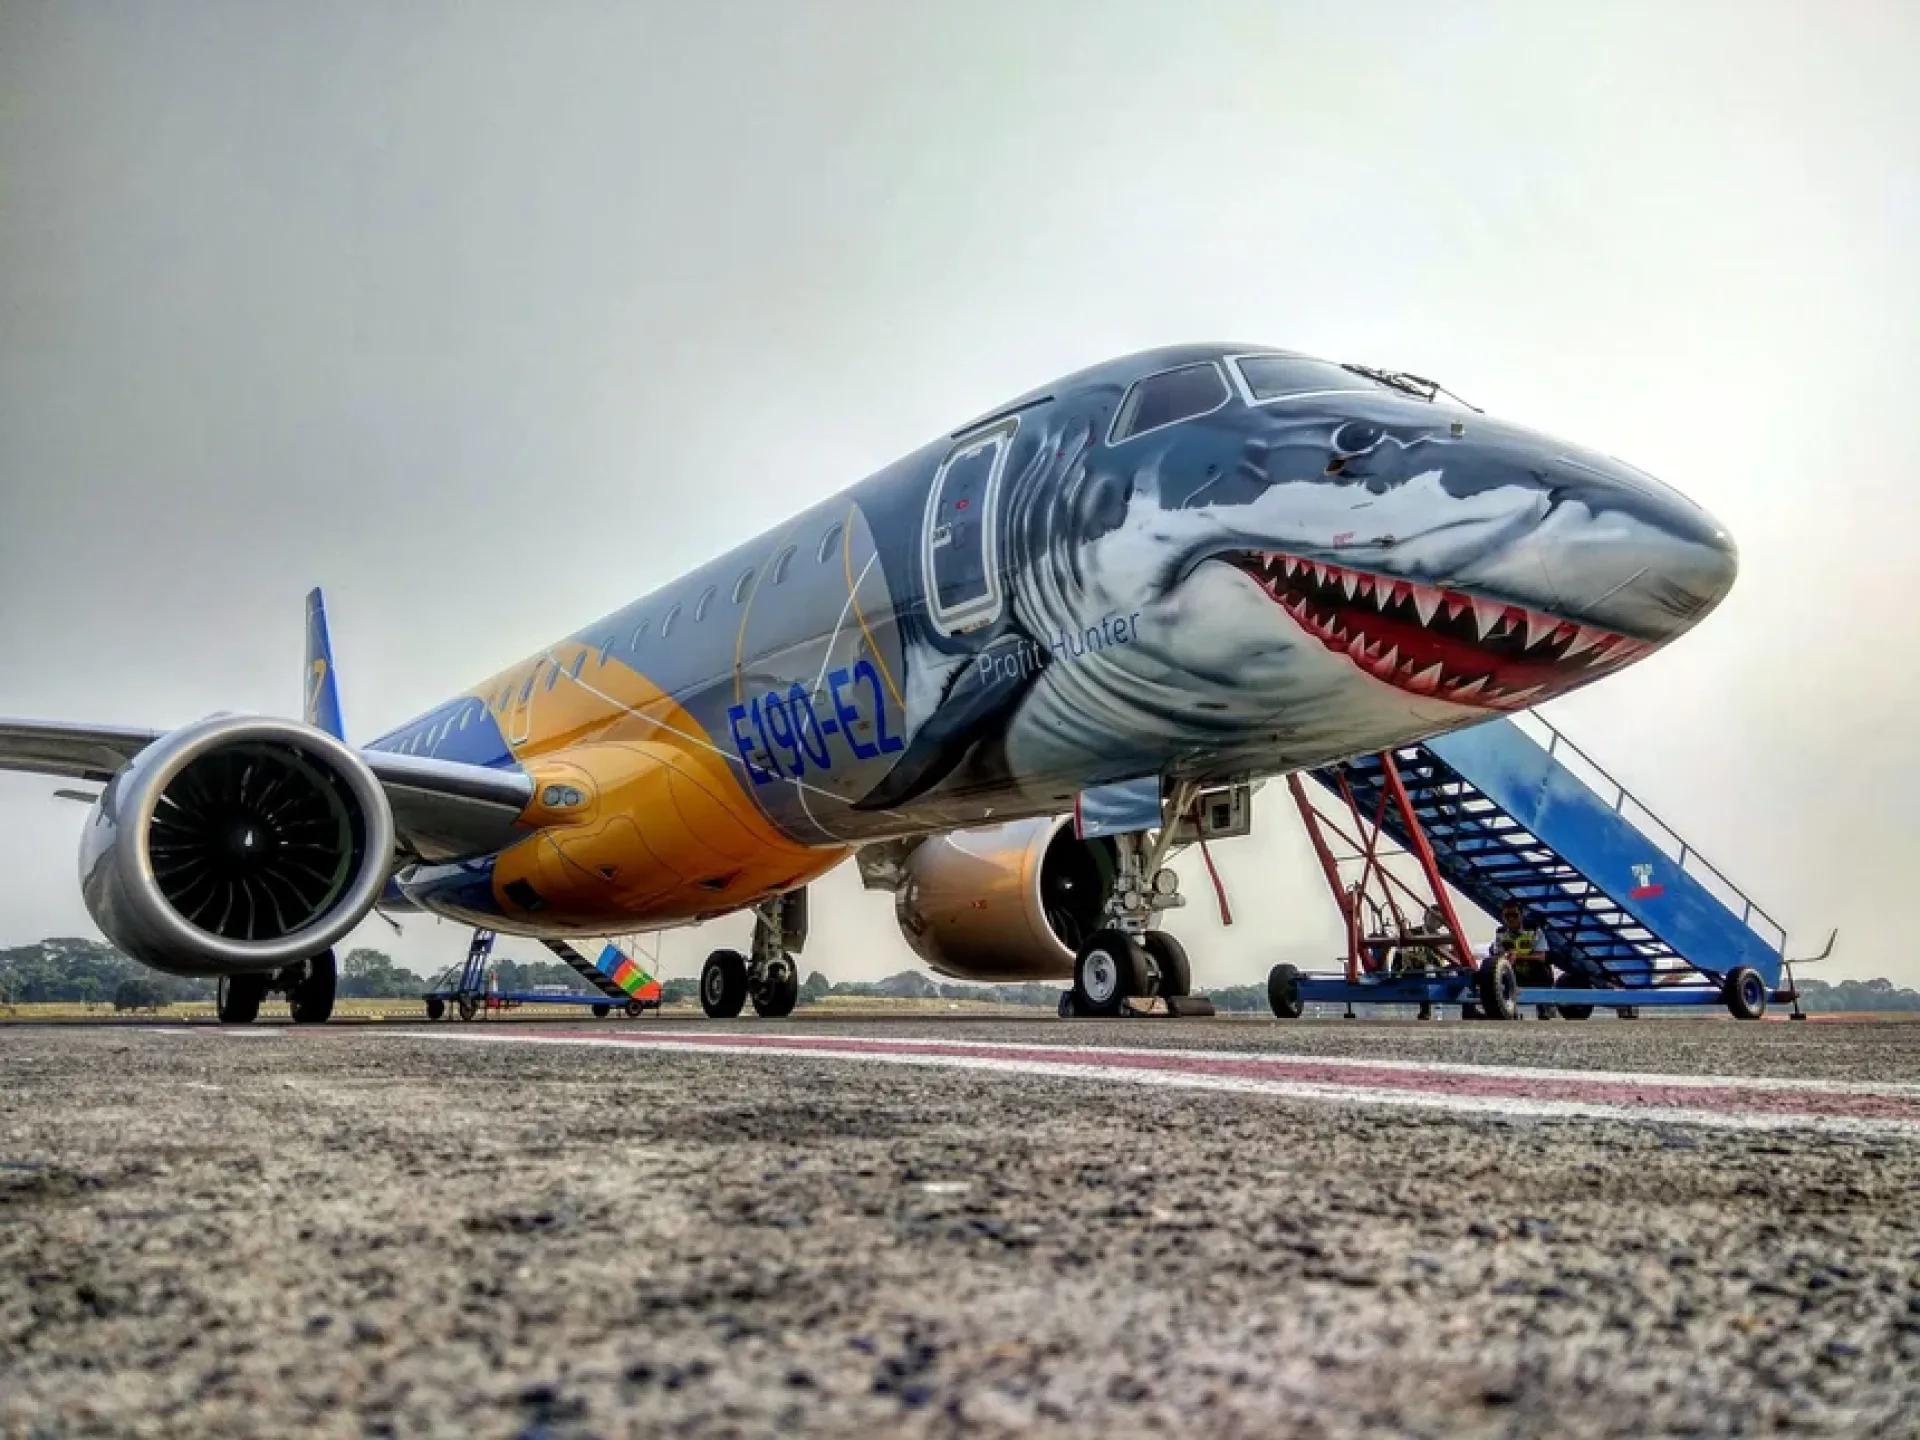 An airplane with a shark design on it